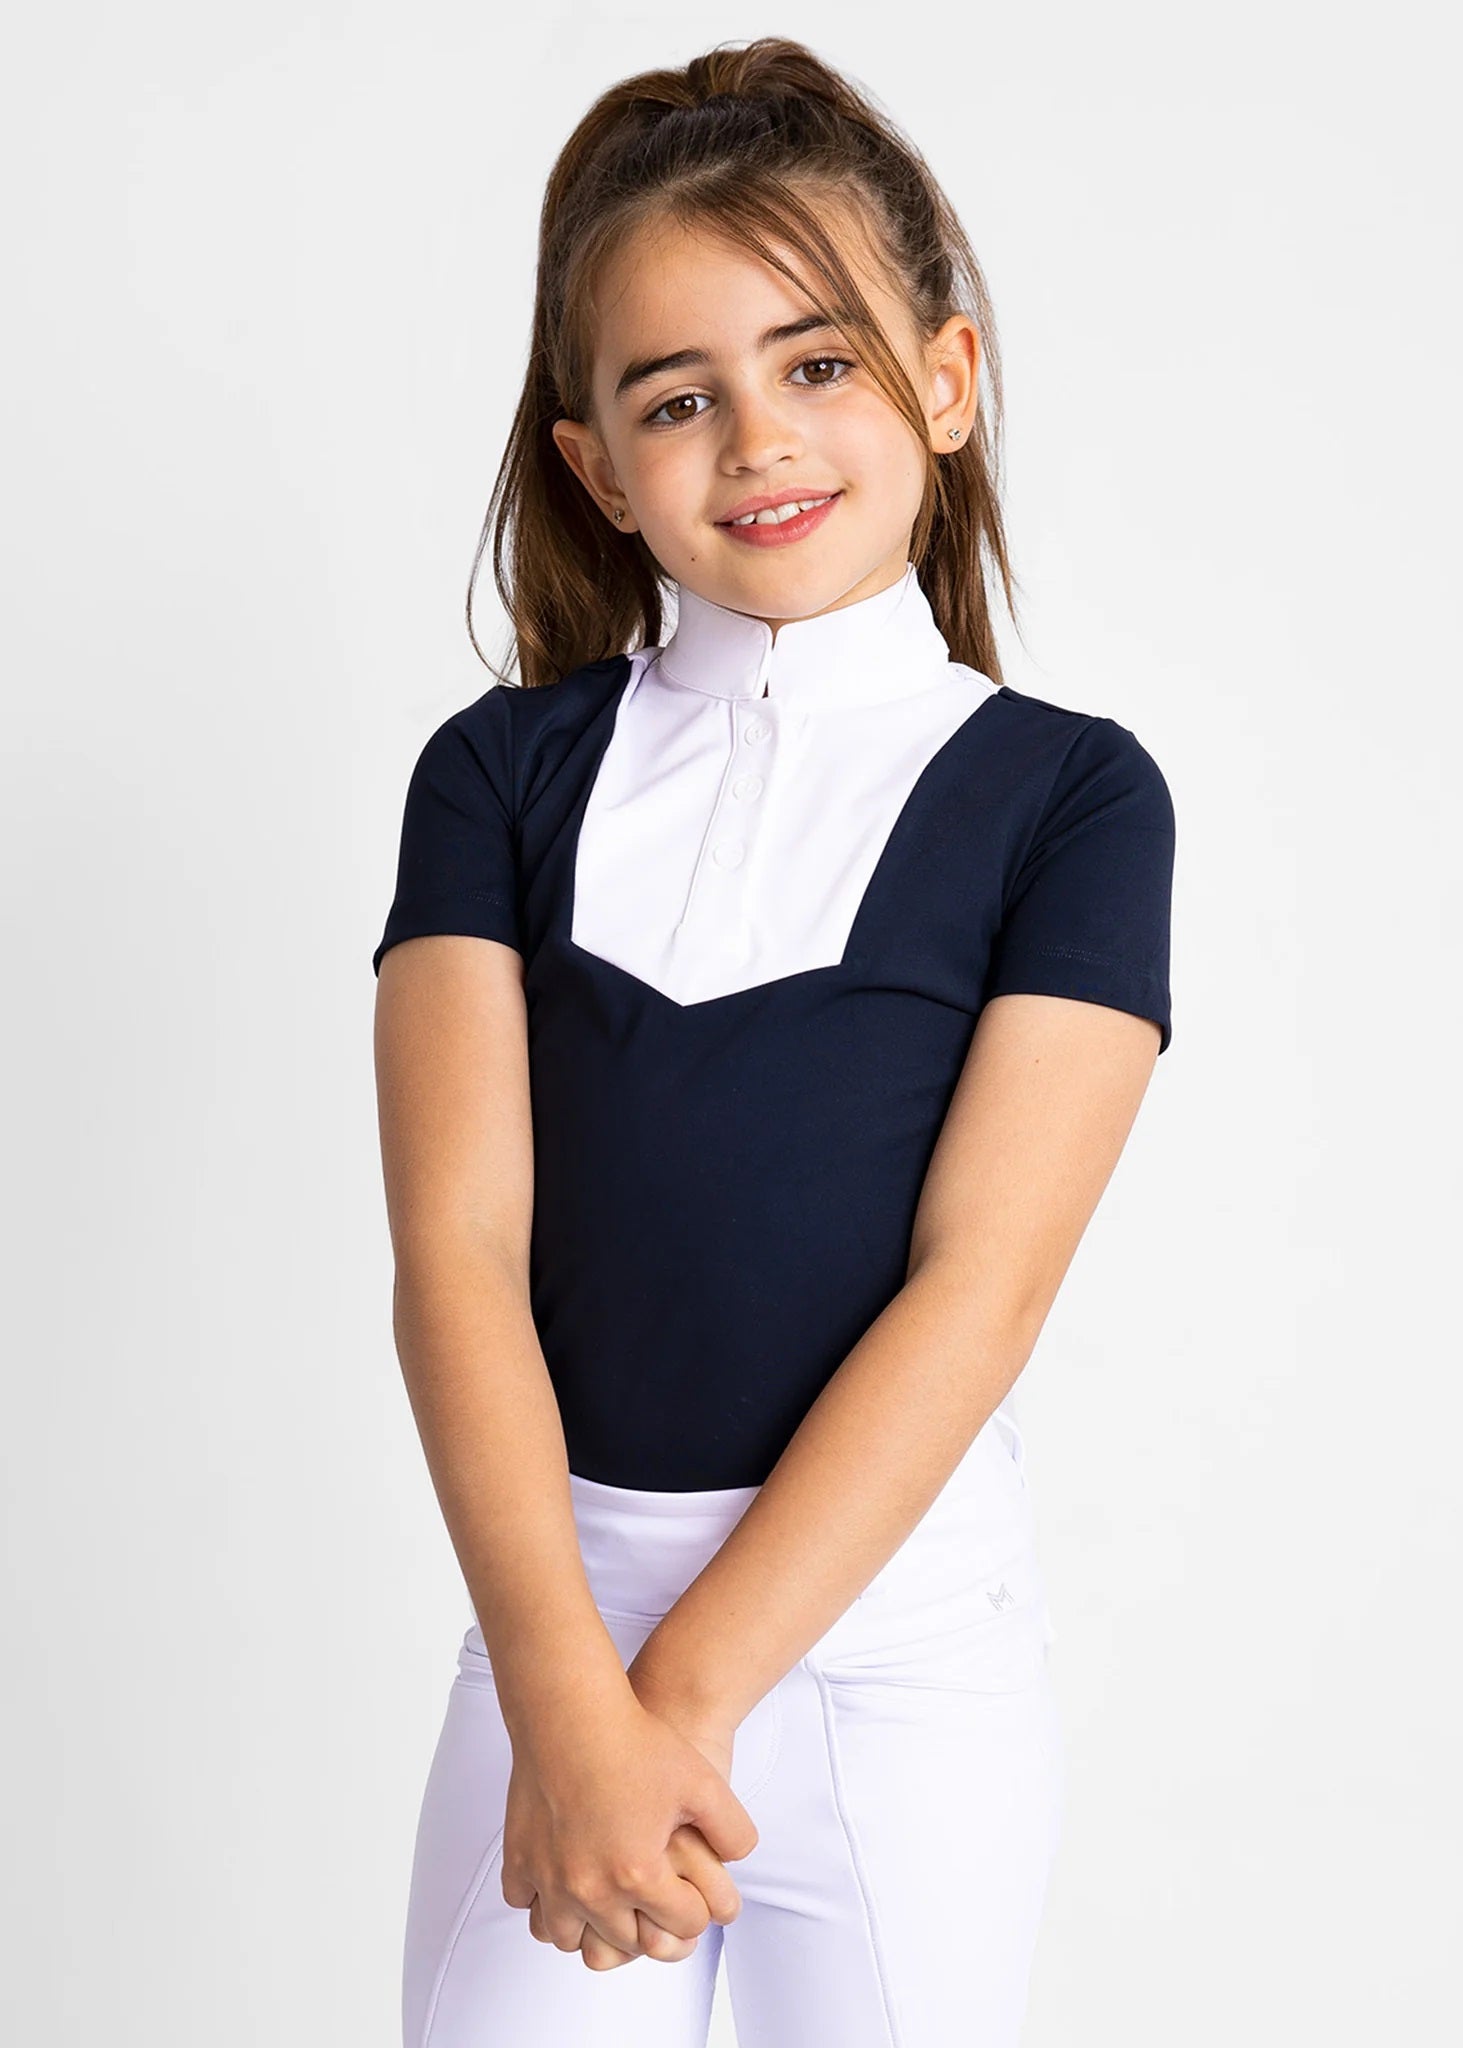 Young Riders Short Sleeve Sienna Show Shirt - Navy